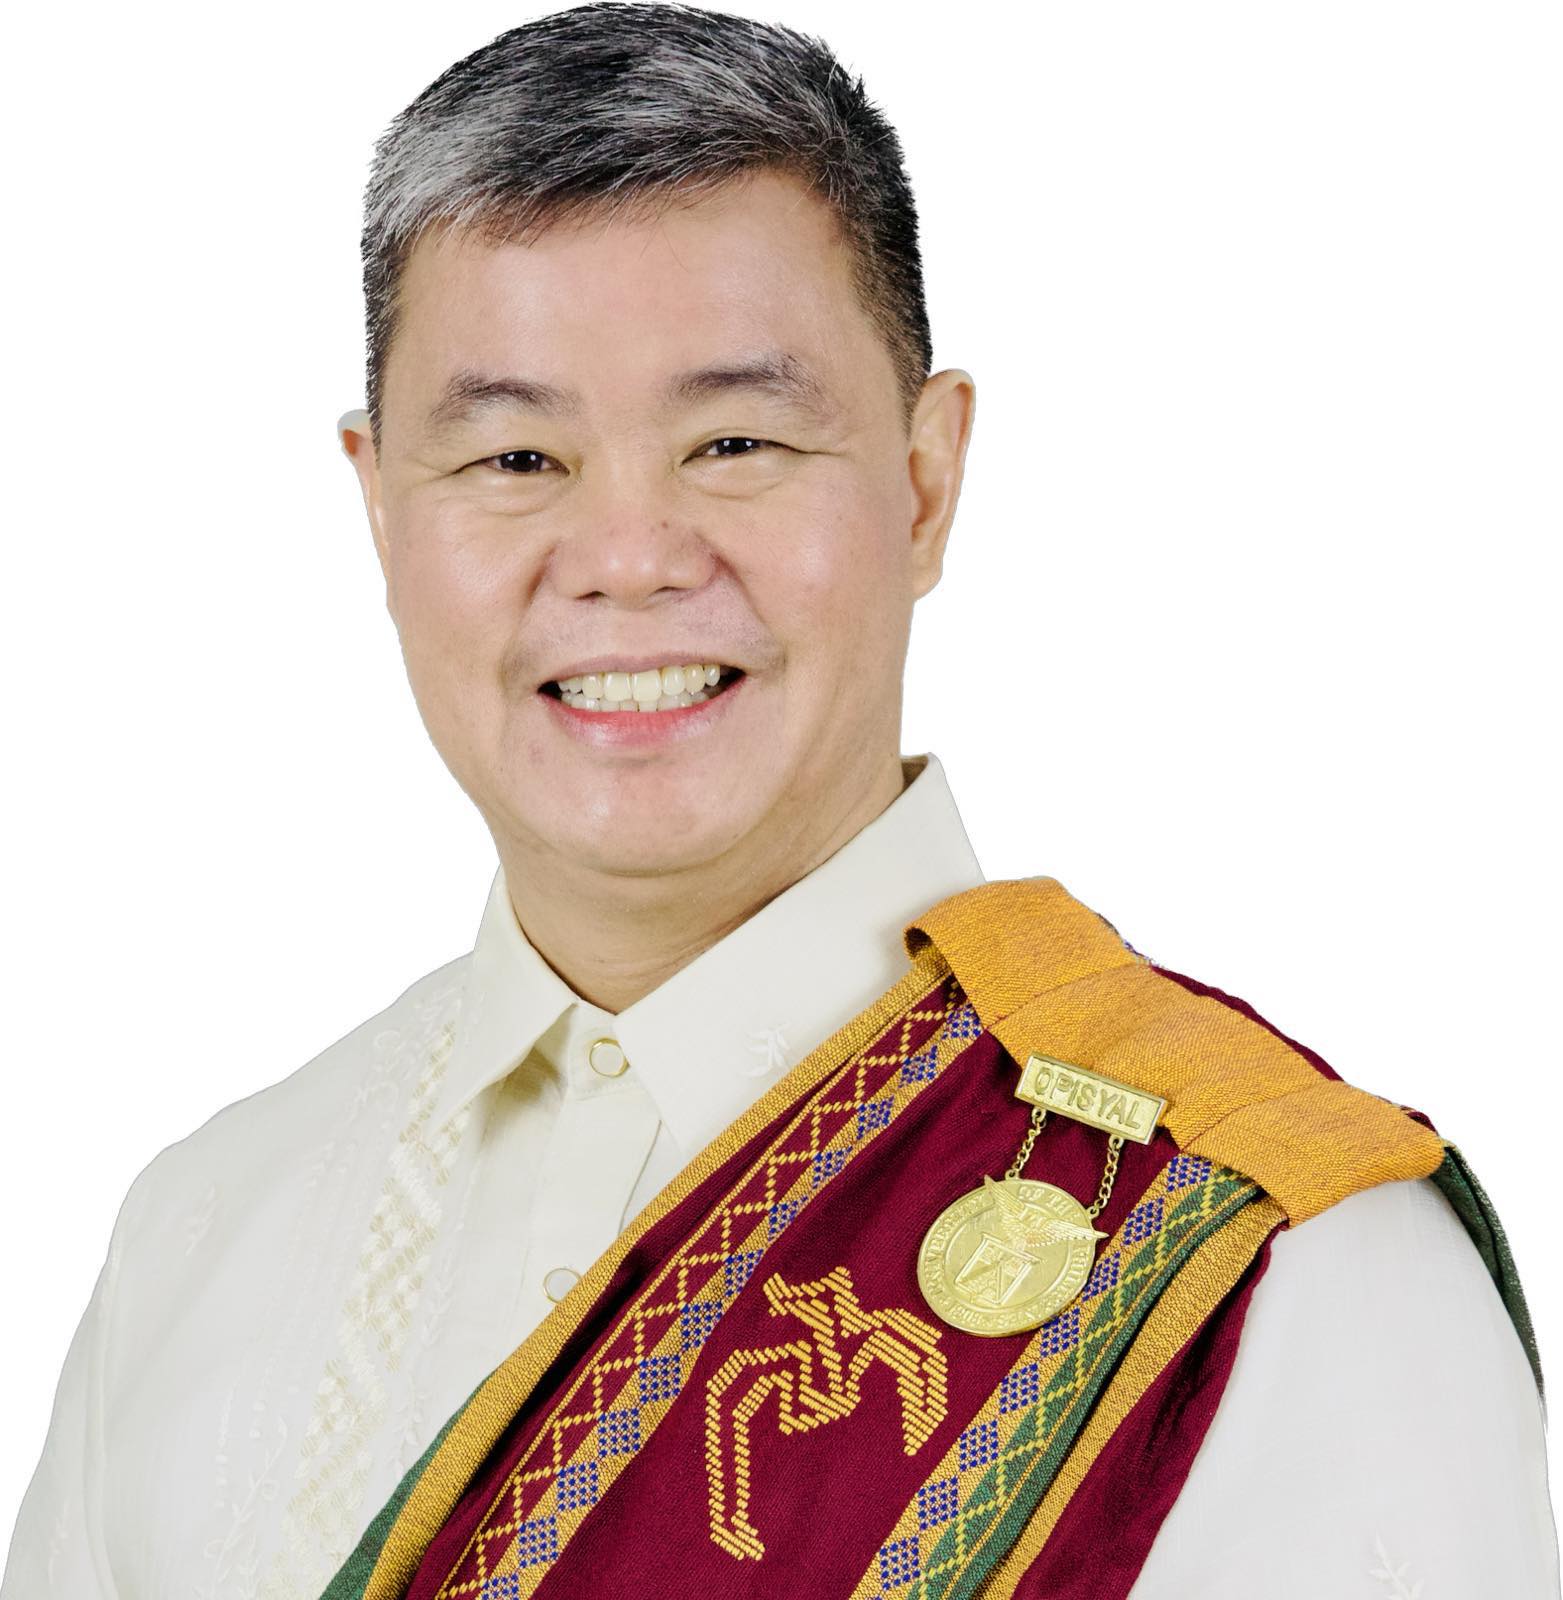 Chancellor Mike Tee: Venture in research to improve lives of Filipinos